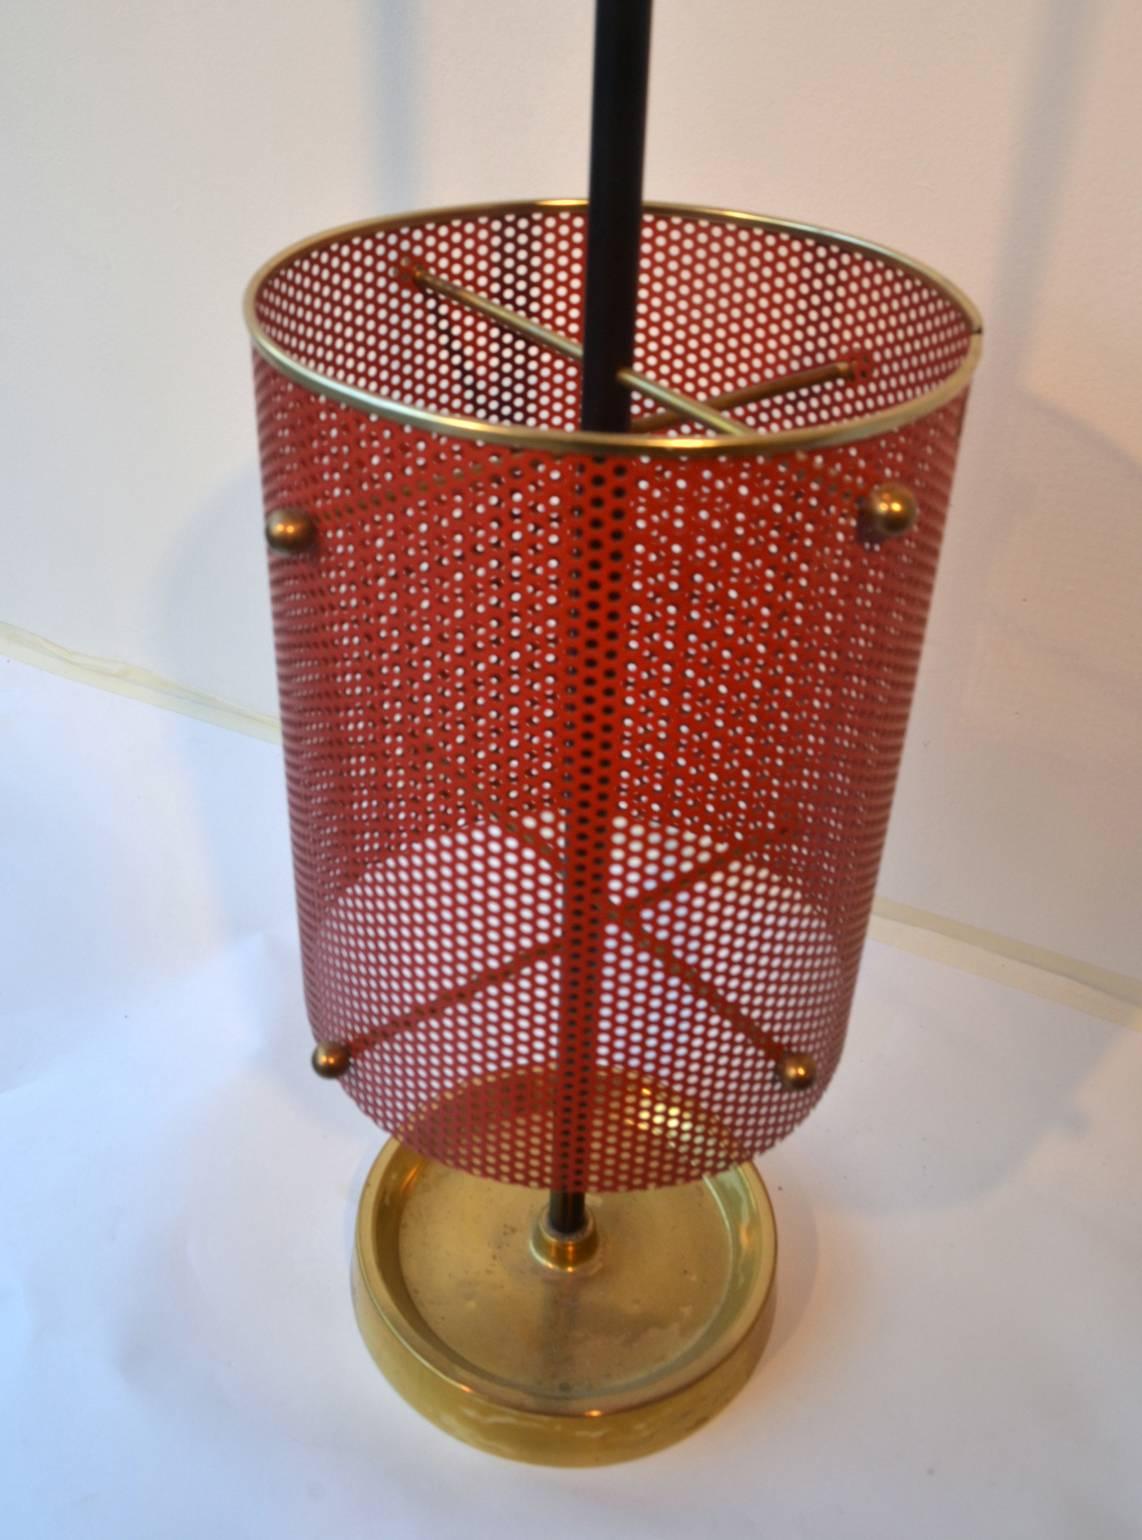 Brass foot holds a red perforated umbrella Stand. Compact and elegant design typical of the 1950s, France.
 